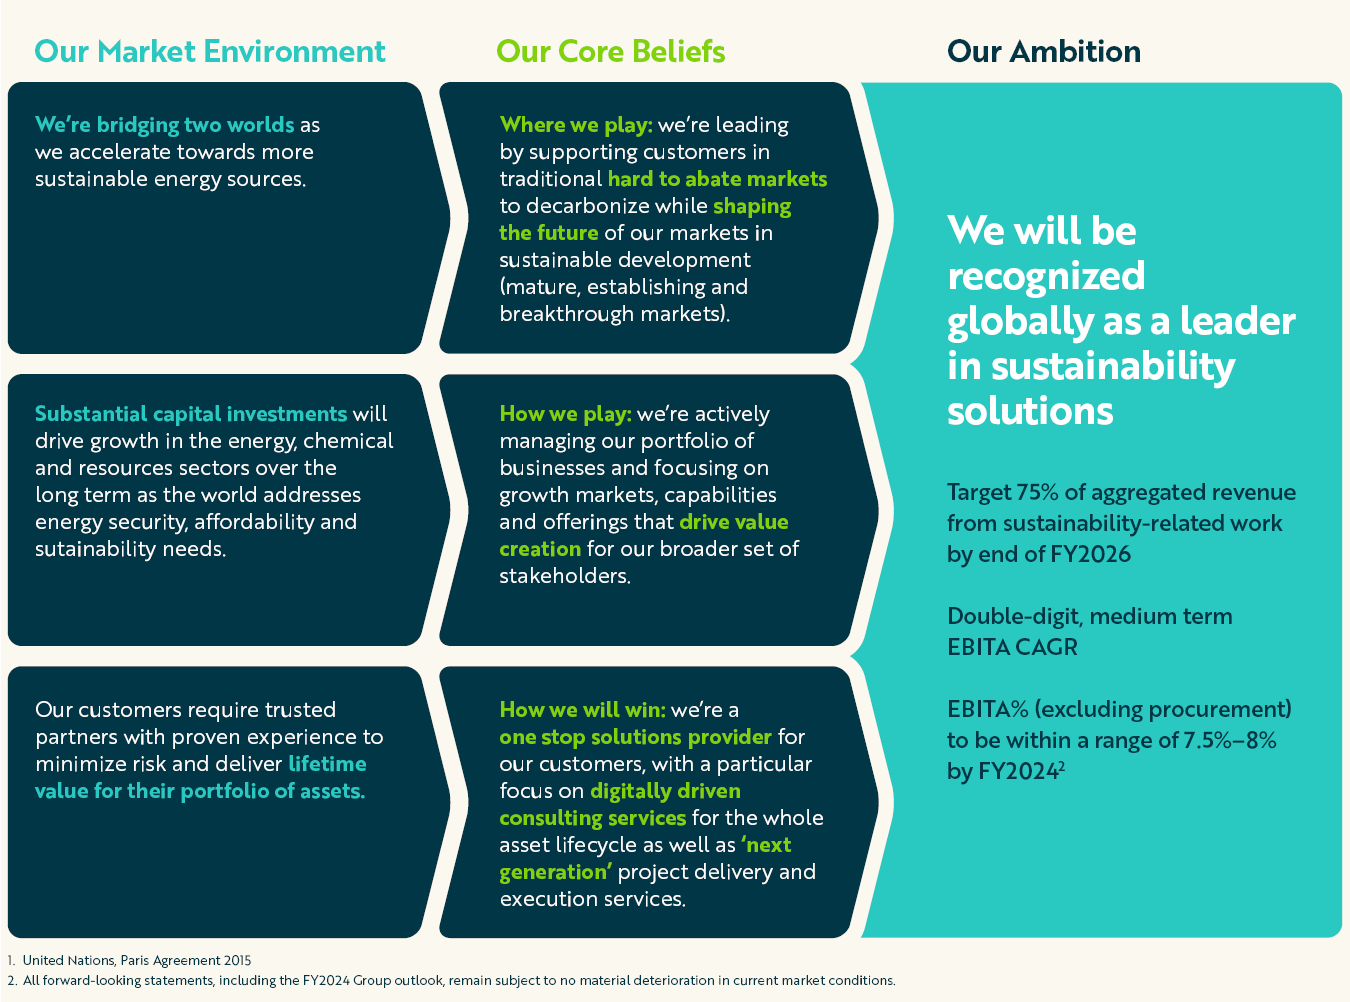 Infographic detailing our market environment, core beliefs and ambition.